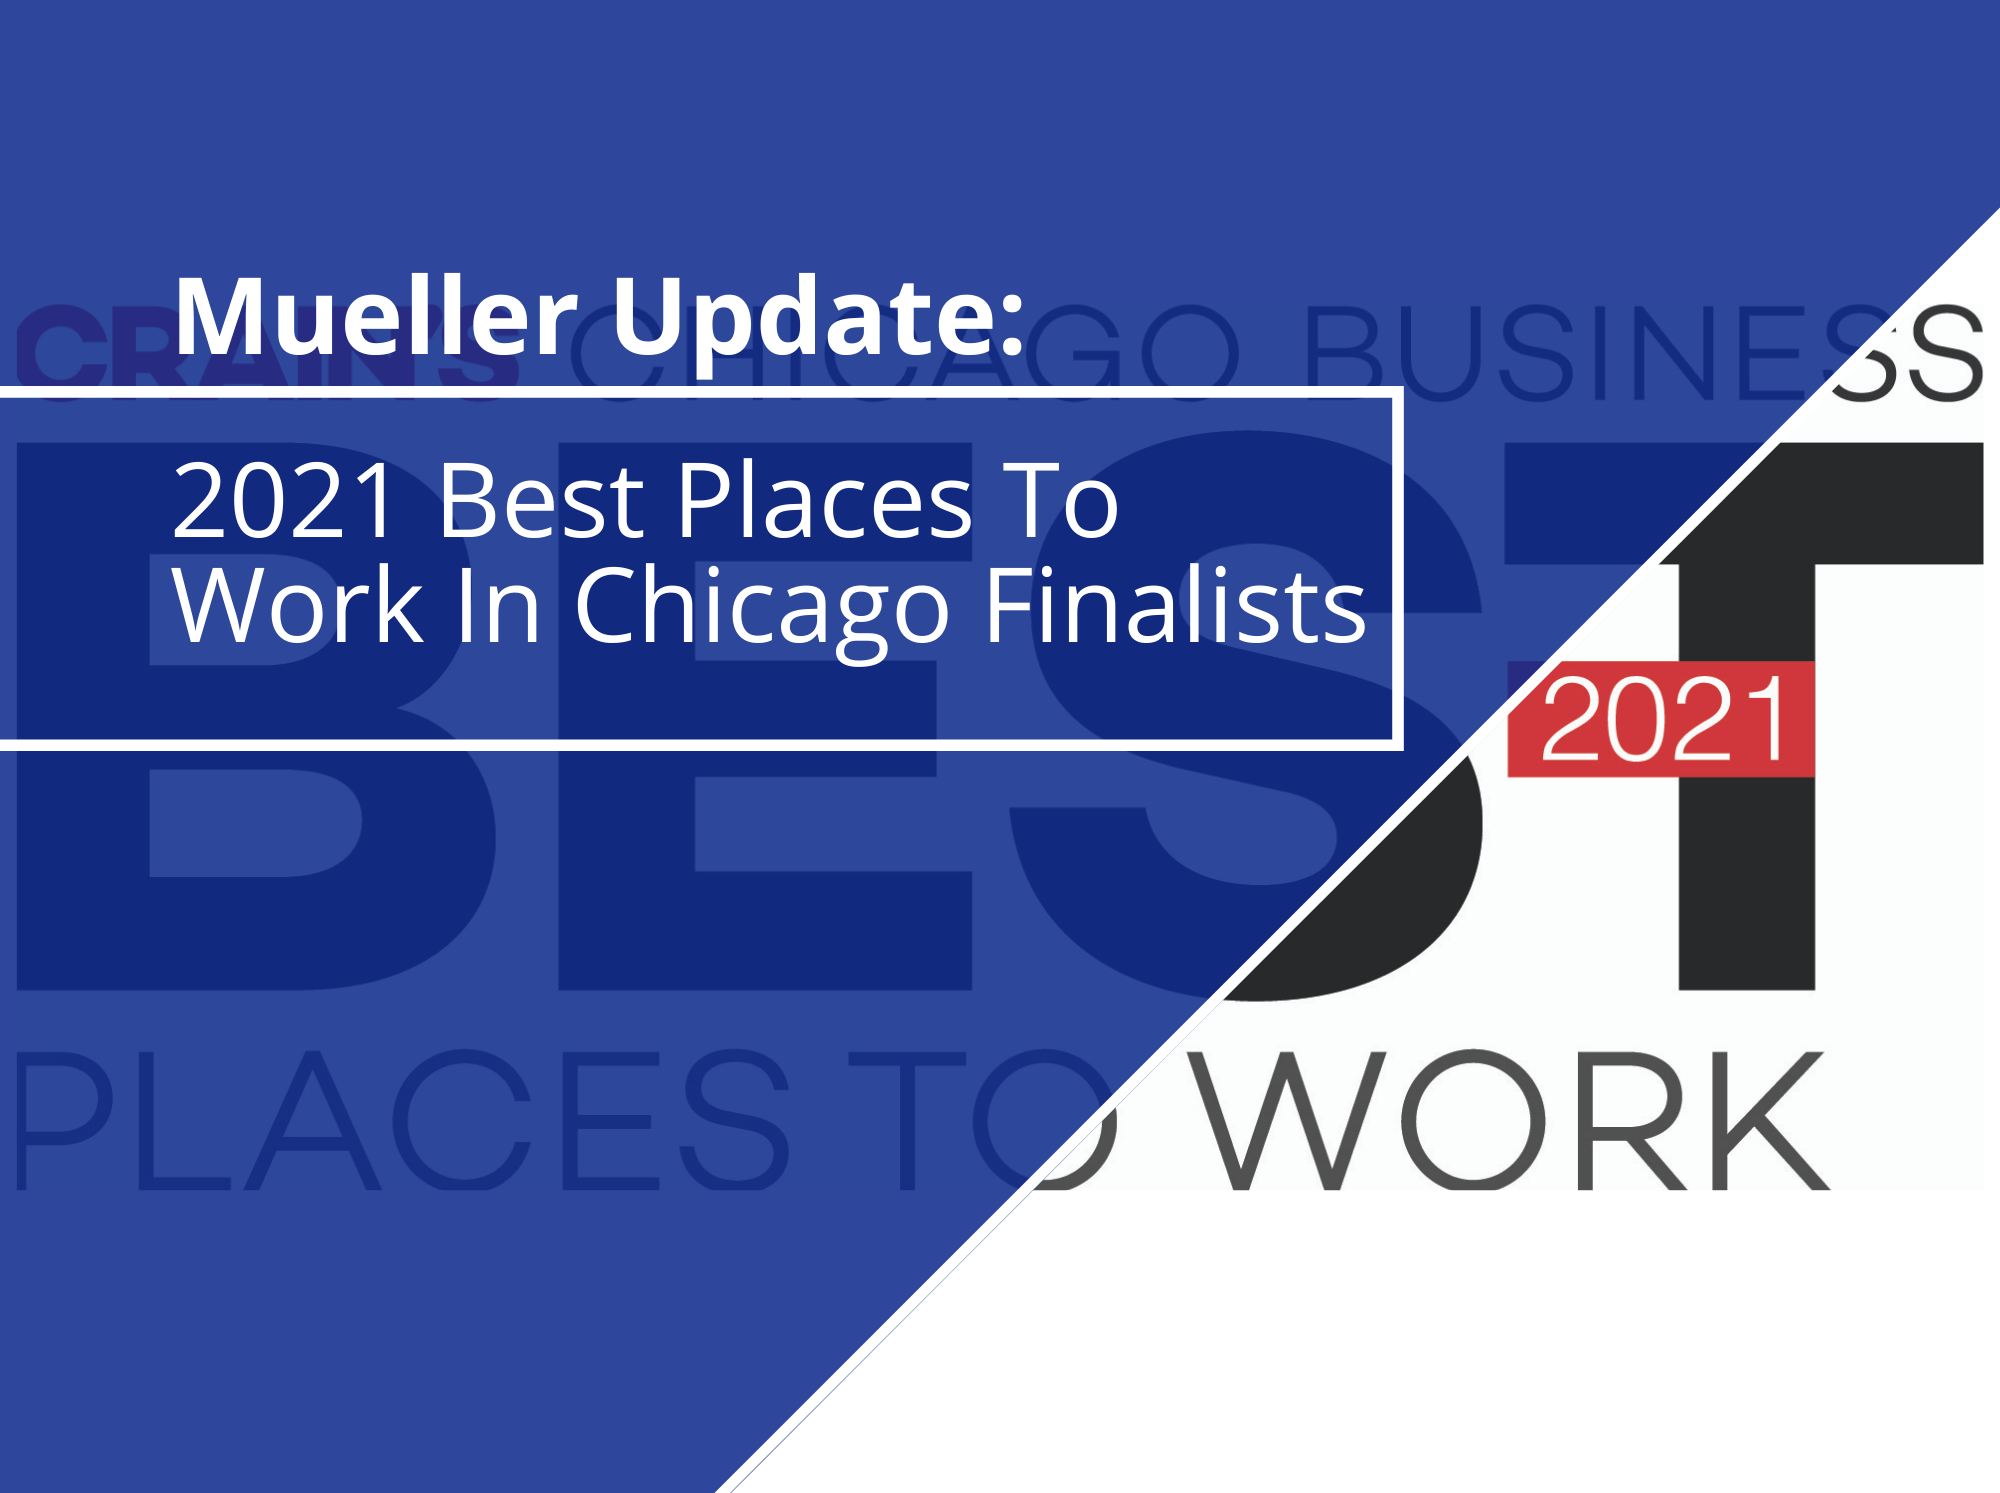 2021 Best Places to Work in Chicago Finalists